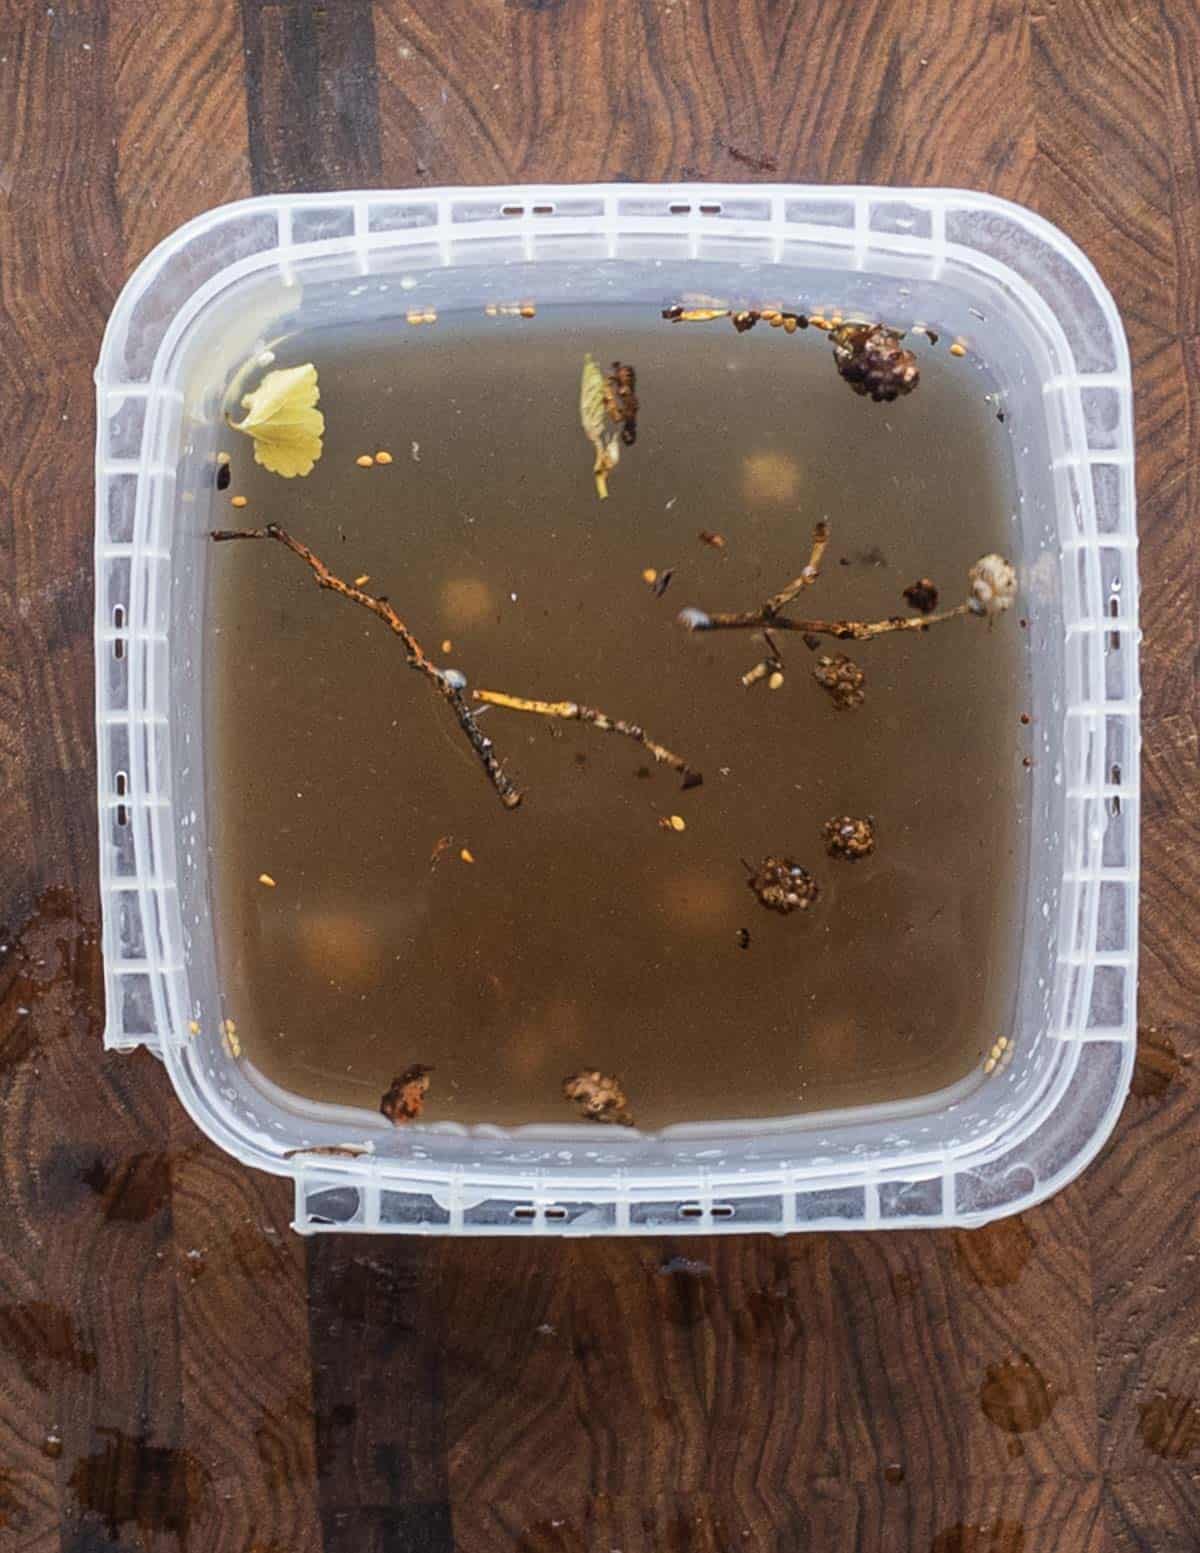 Soaking white mulberries in water to clean them showing sticks and debris rising to the surface. 